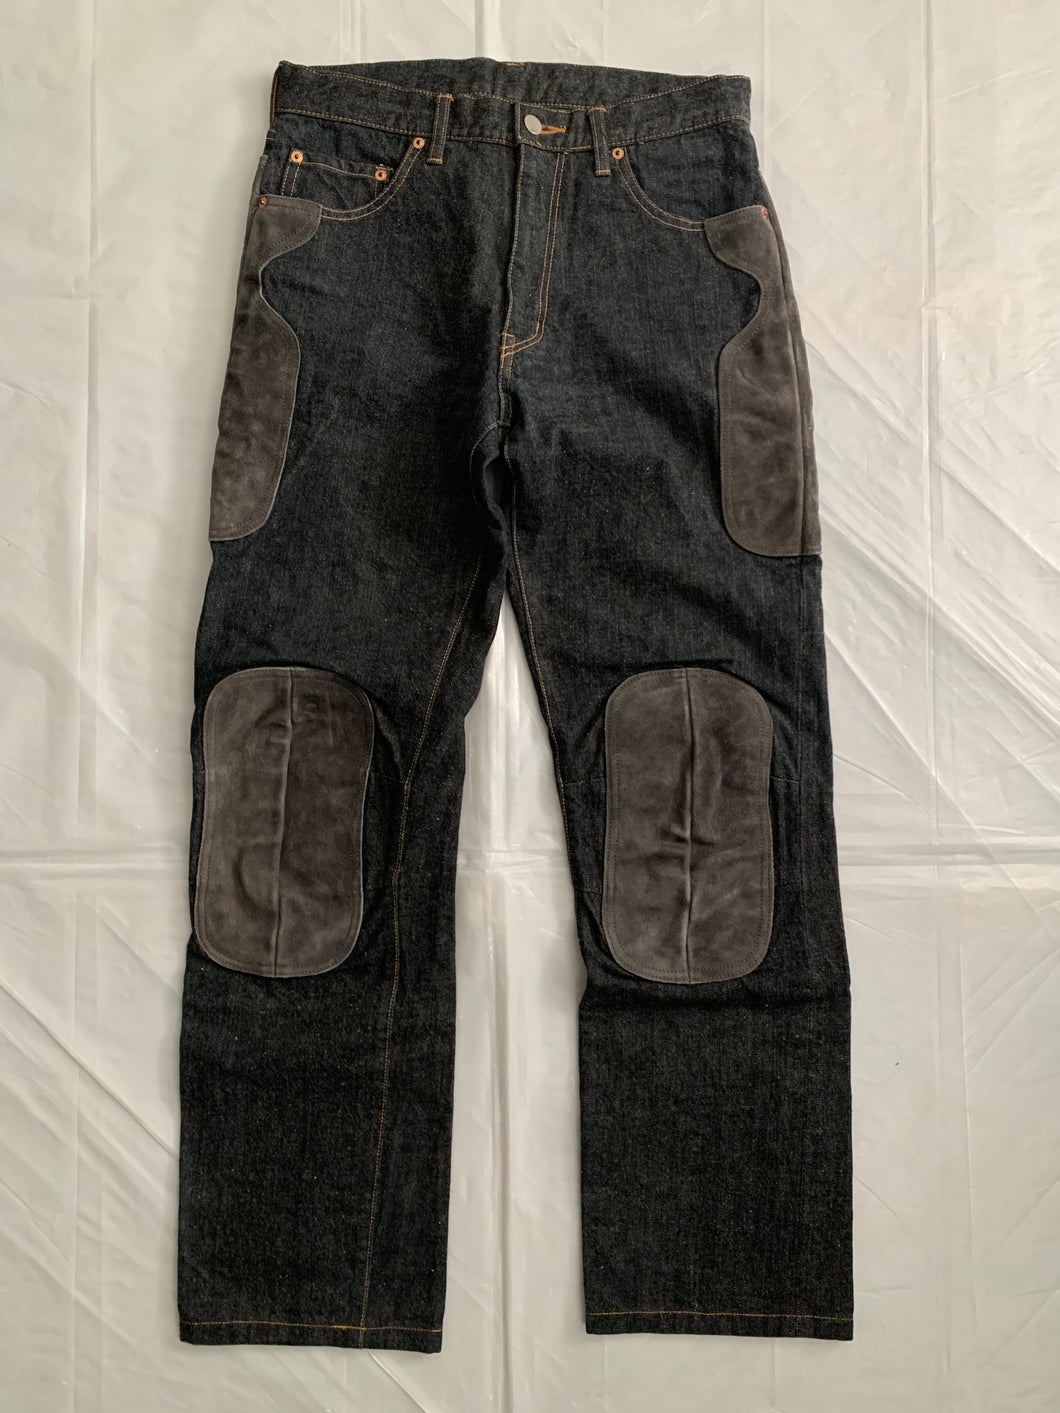 2000s CDGH Leather Patch Paneled Work Denim - Size M